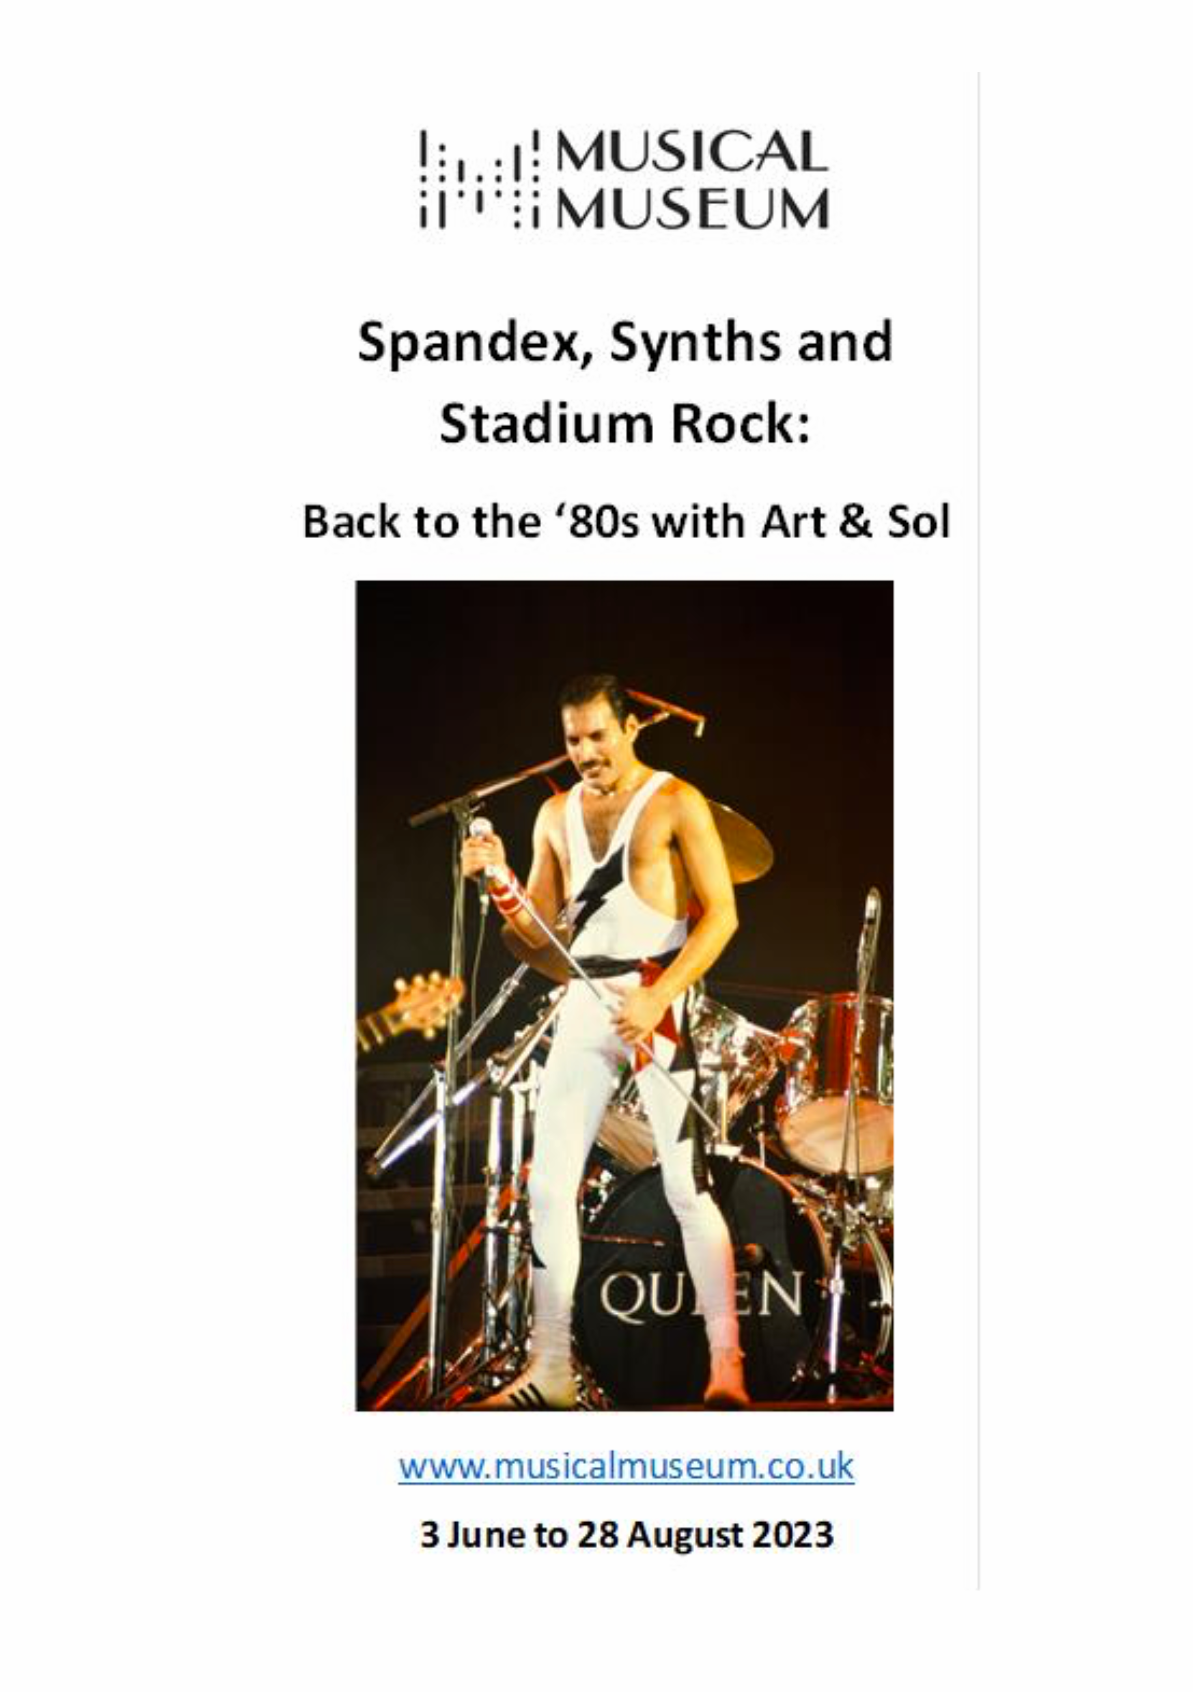 Spandex Synths and Stadium Rock brochure page 1